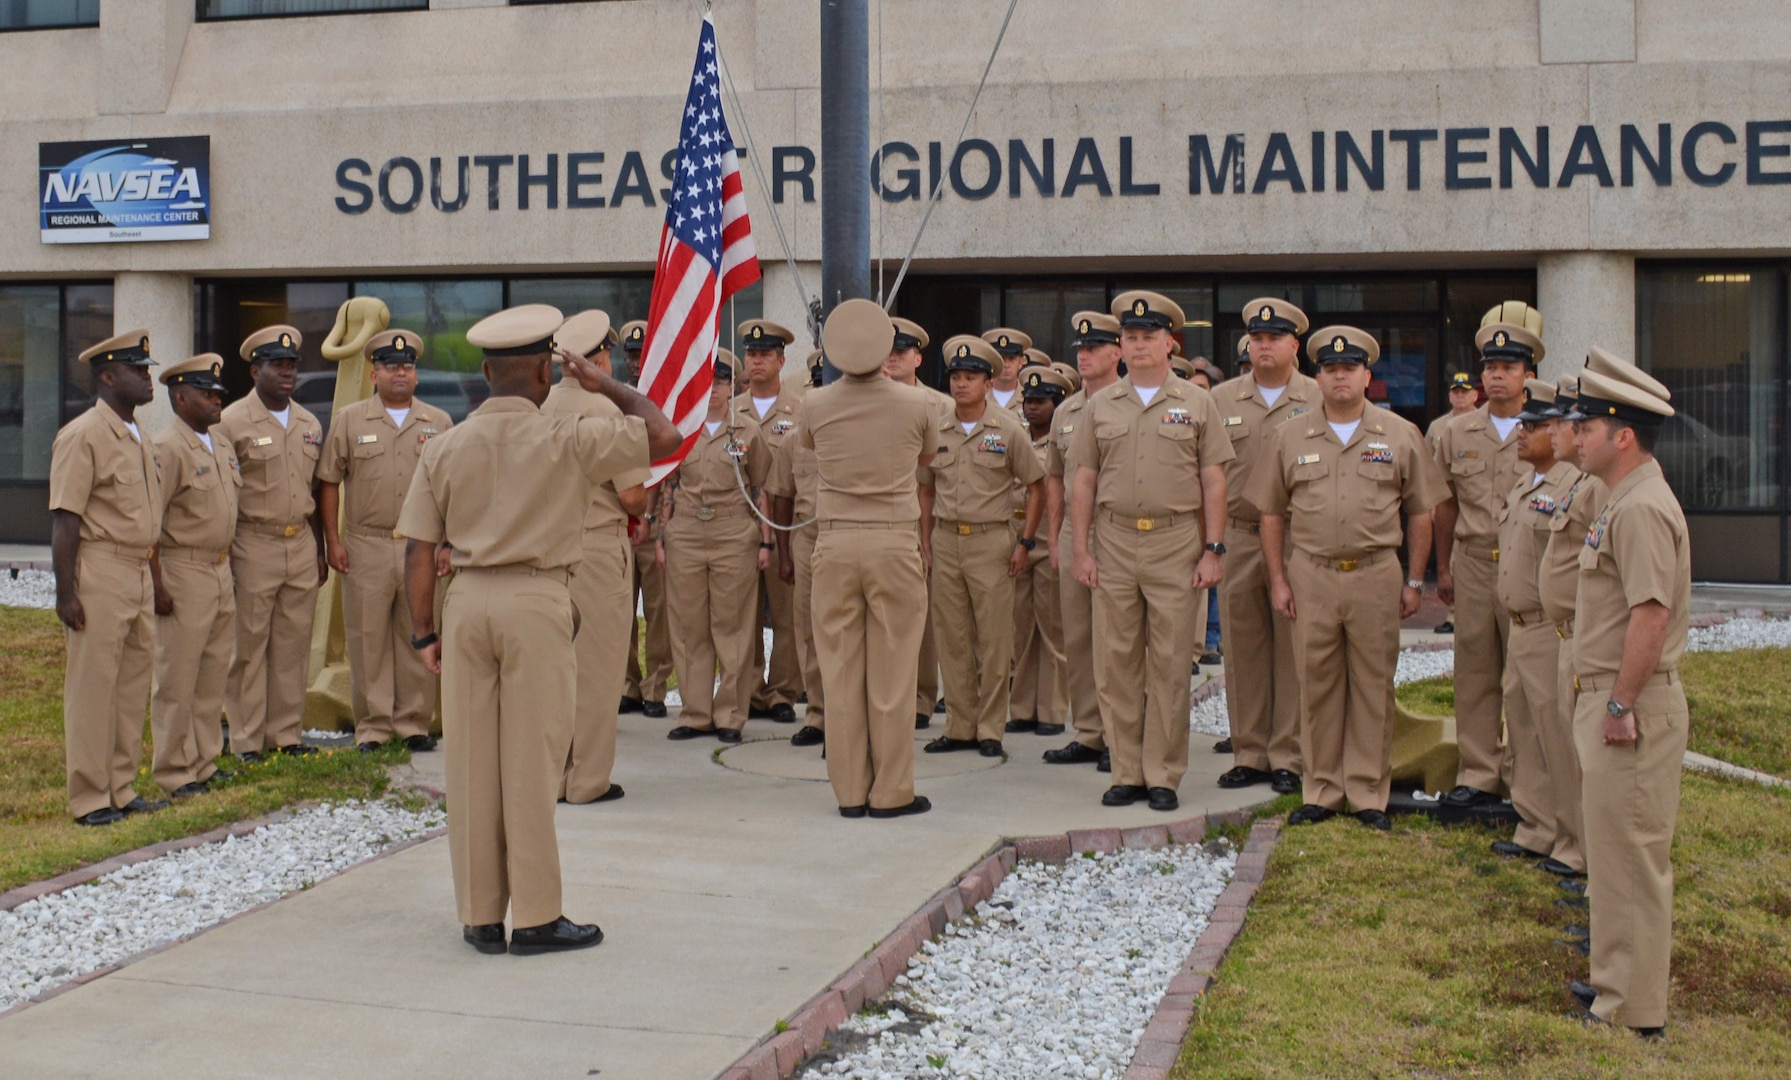 Active and retired Chief Petty Officers (CPO) render morning colors at Southeast Regional Maintenance Center (SERMC) March 31. Raising the colors is part of celebrating the birthday of the Chief, April 1st. The rank of CPO was established by President Benjamin Harrison when he signed General Order 409.

